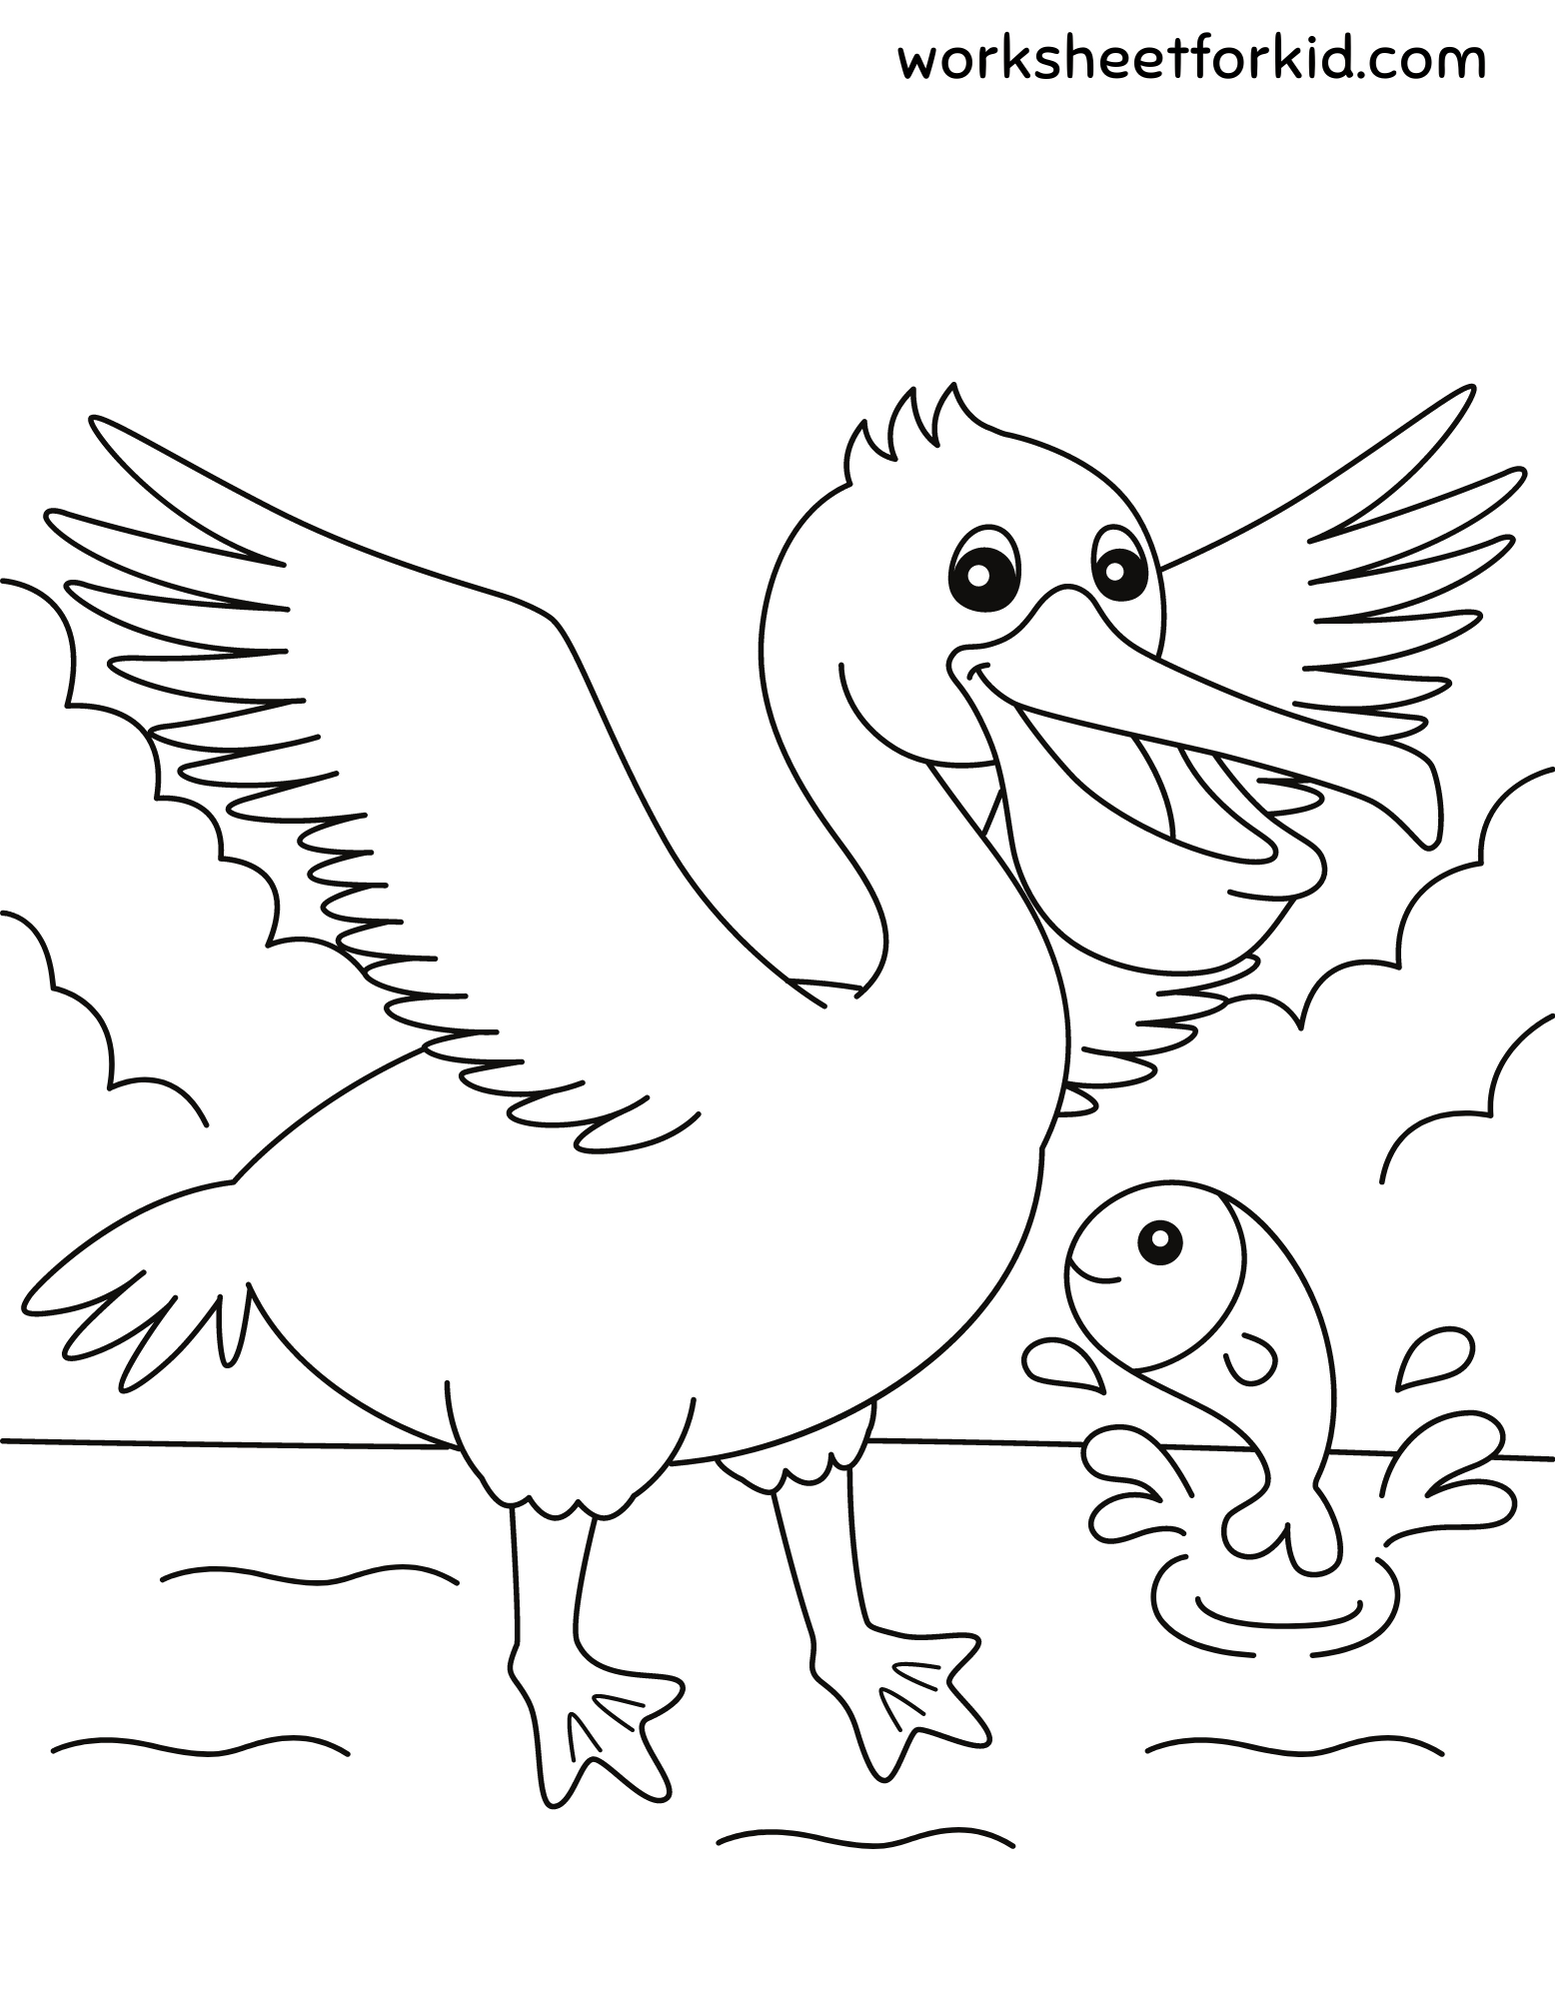 Free Animals Coloring Pages-25